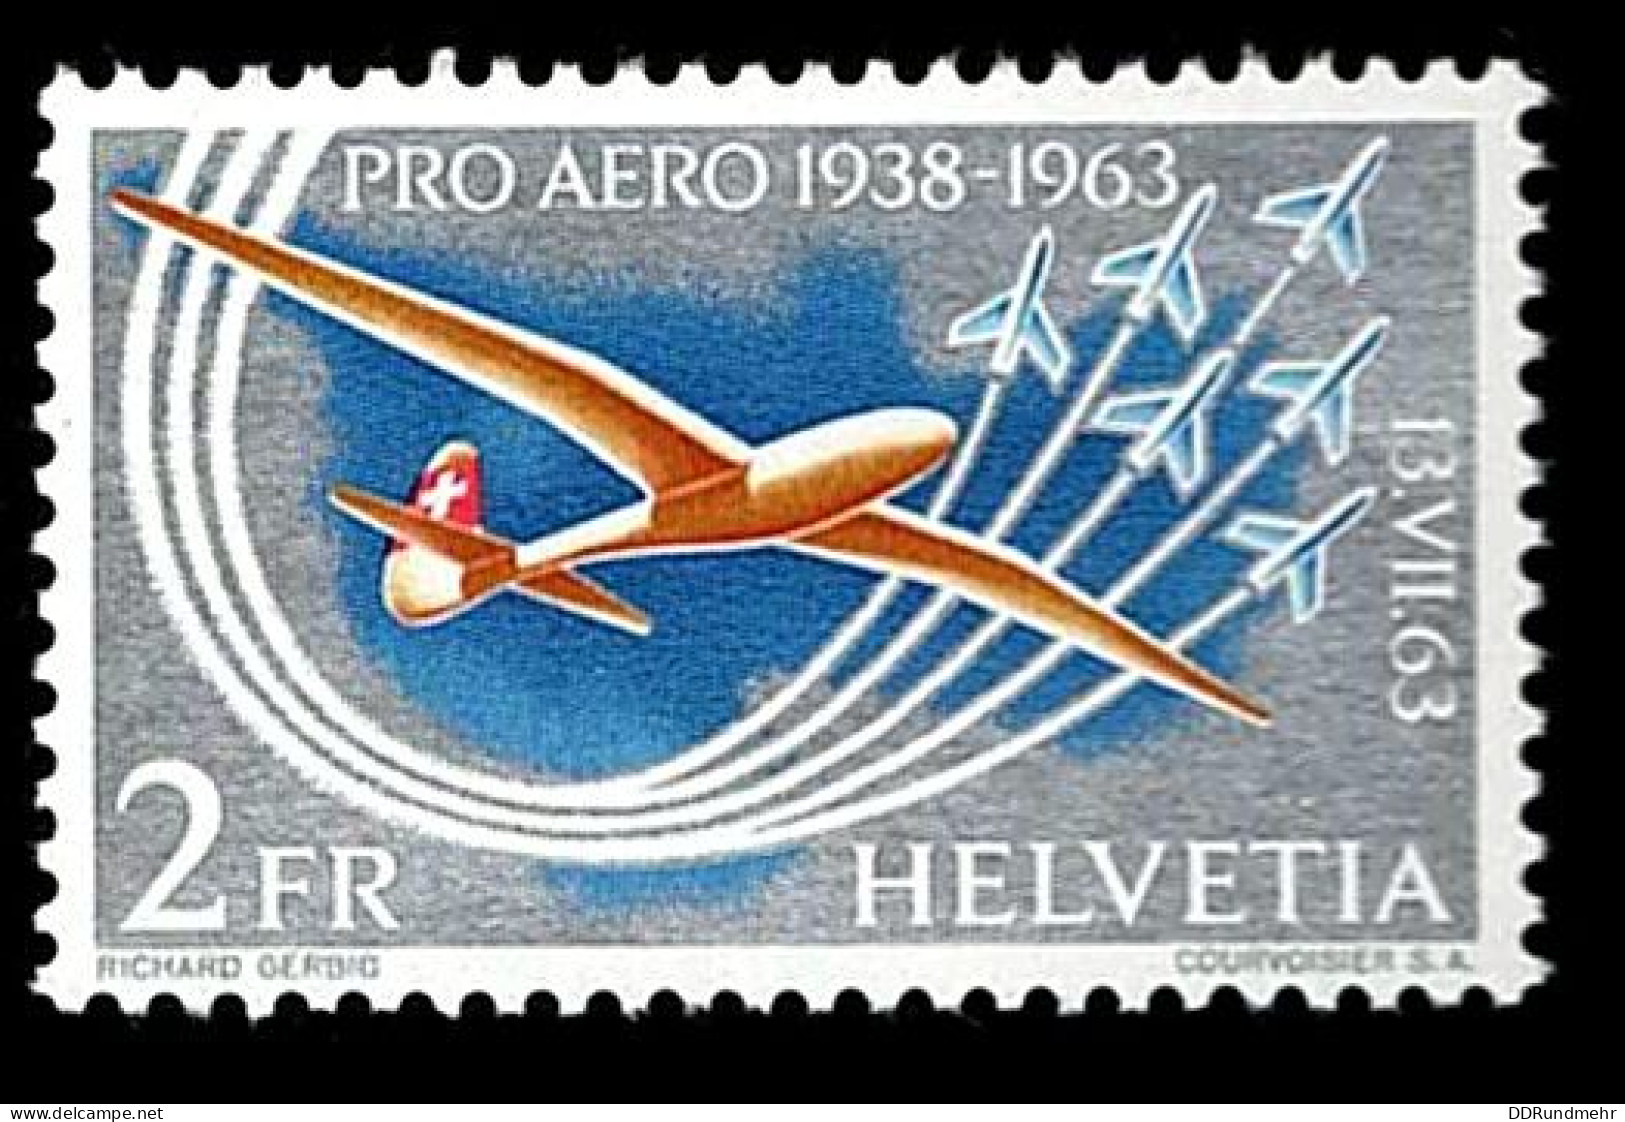 1963 Pro Aero  Michel CH 780 Stamp Number CH C46 Yvert Et Tellier CH PA45 Stanley Gibbons CH 681 Unificato CH A45 Xx MNH - Nuovi